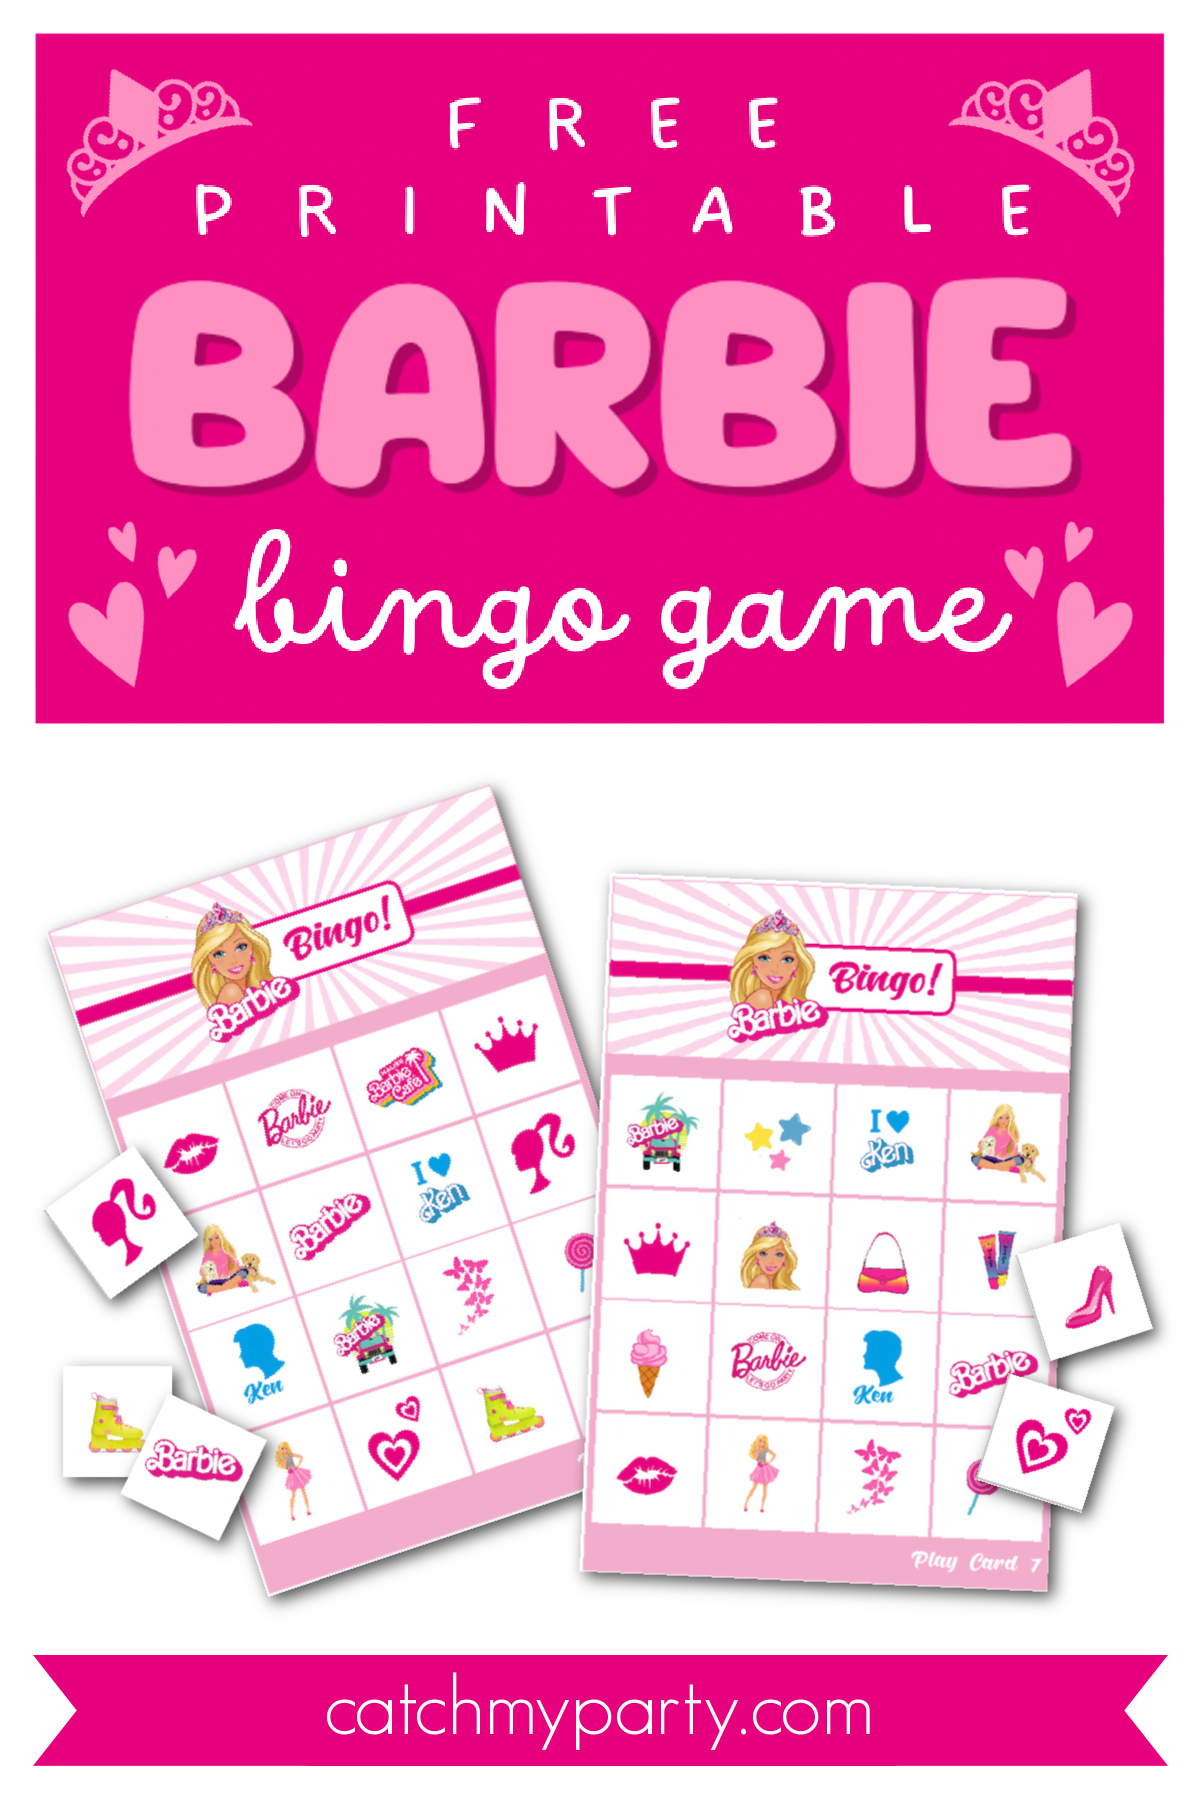 12 Cards) Free Fun Printable Barbie Bingo Game! | Catch My Party - Free Printable Birthday Bingo Cards For Adults